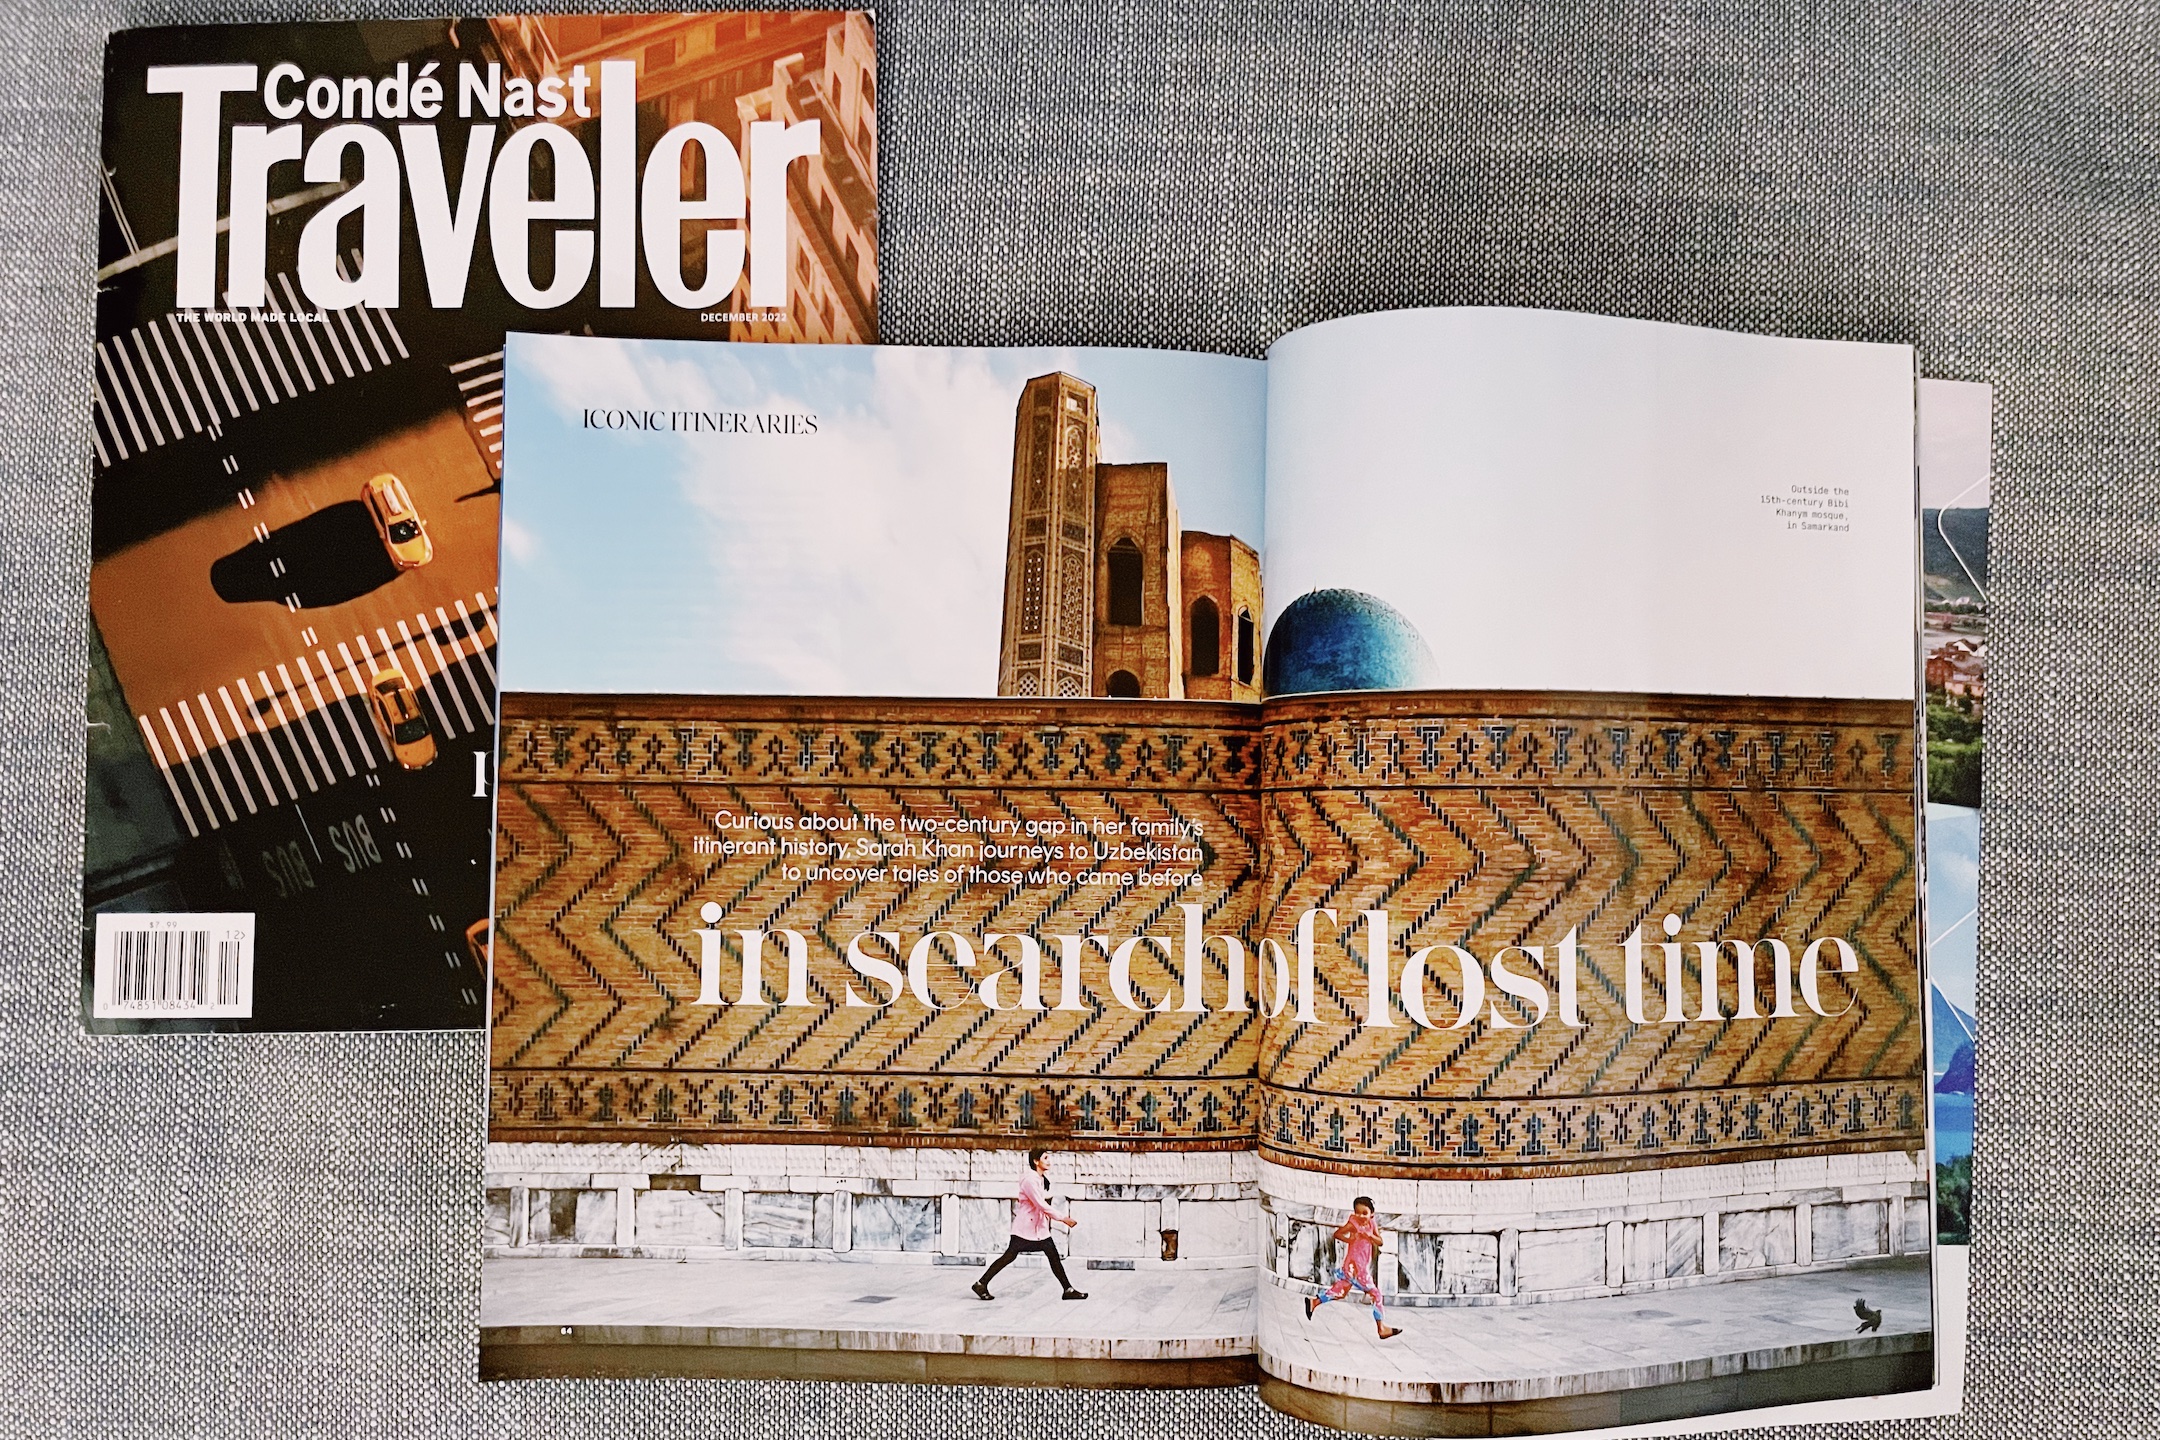 Condé Nast Traveler: In Search of Lost Time